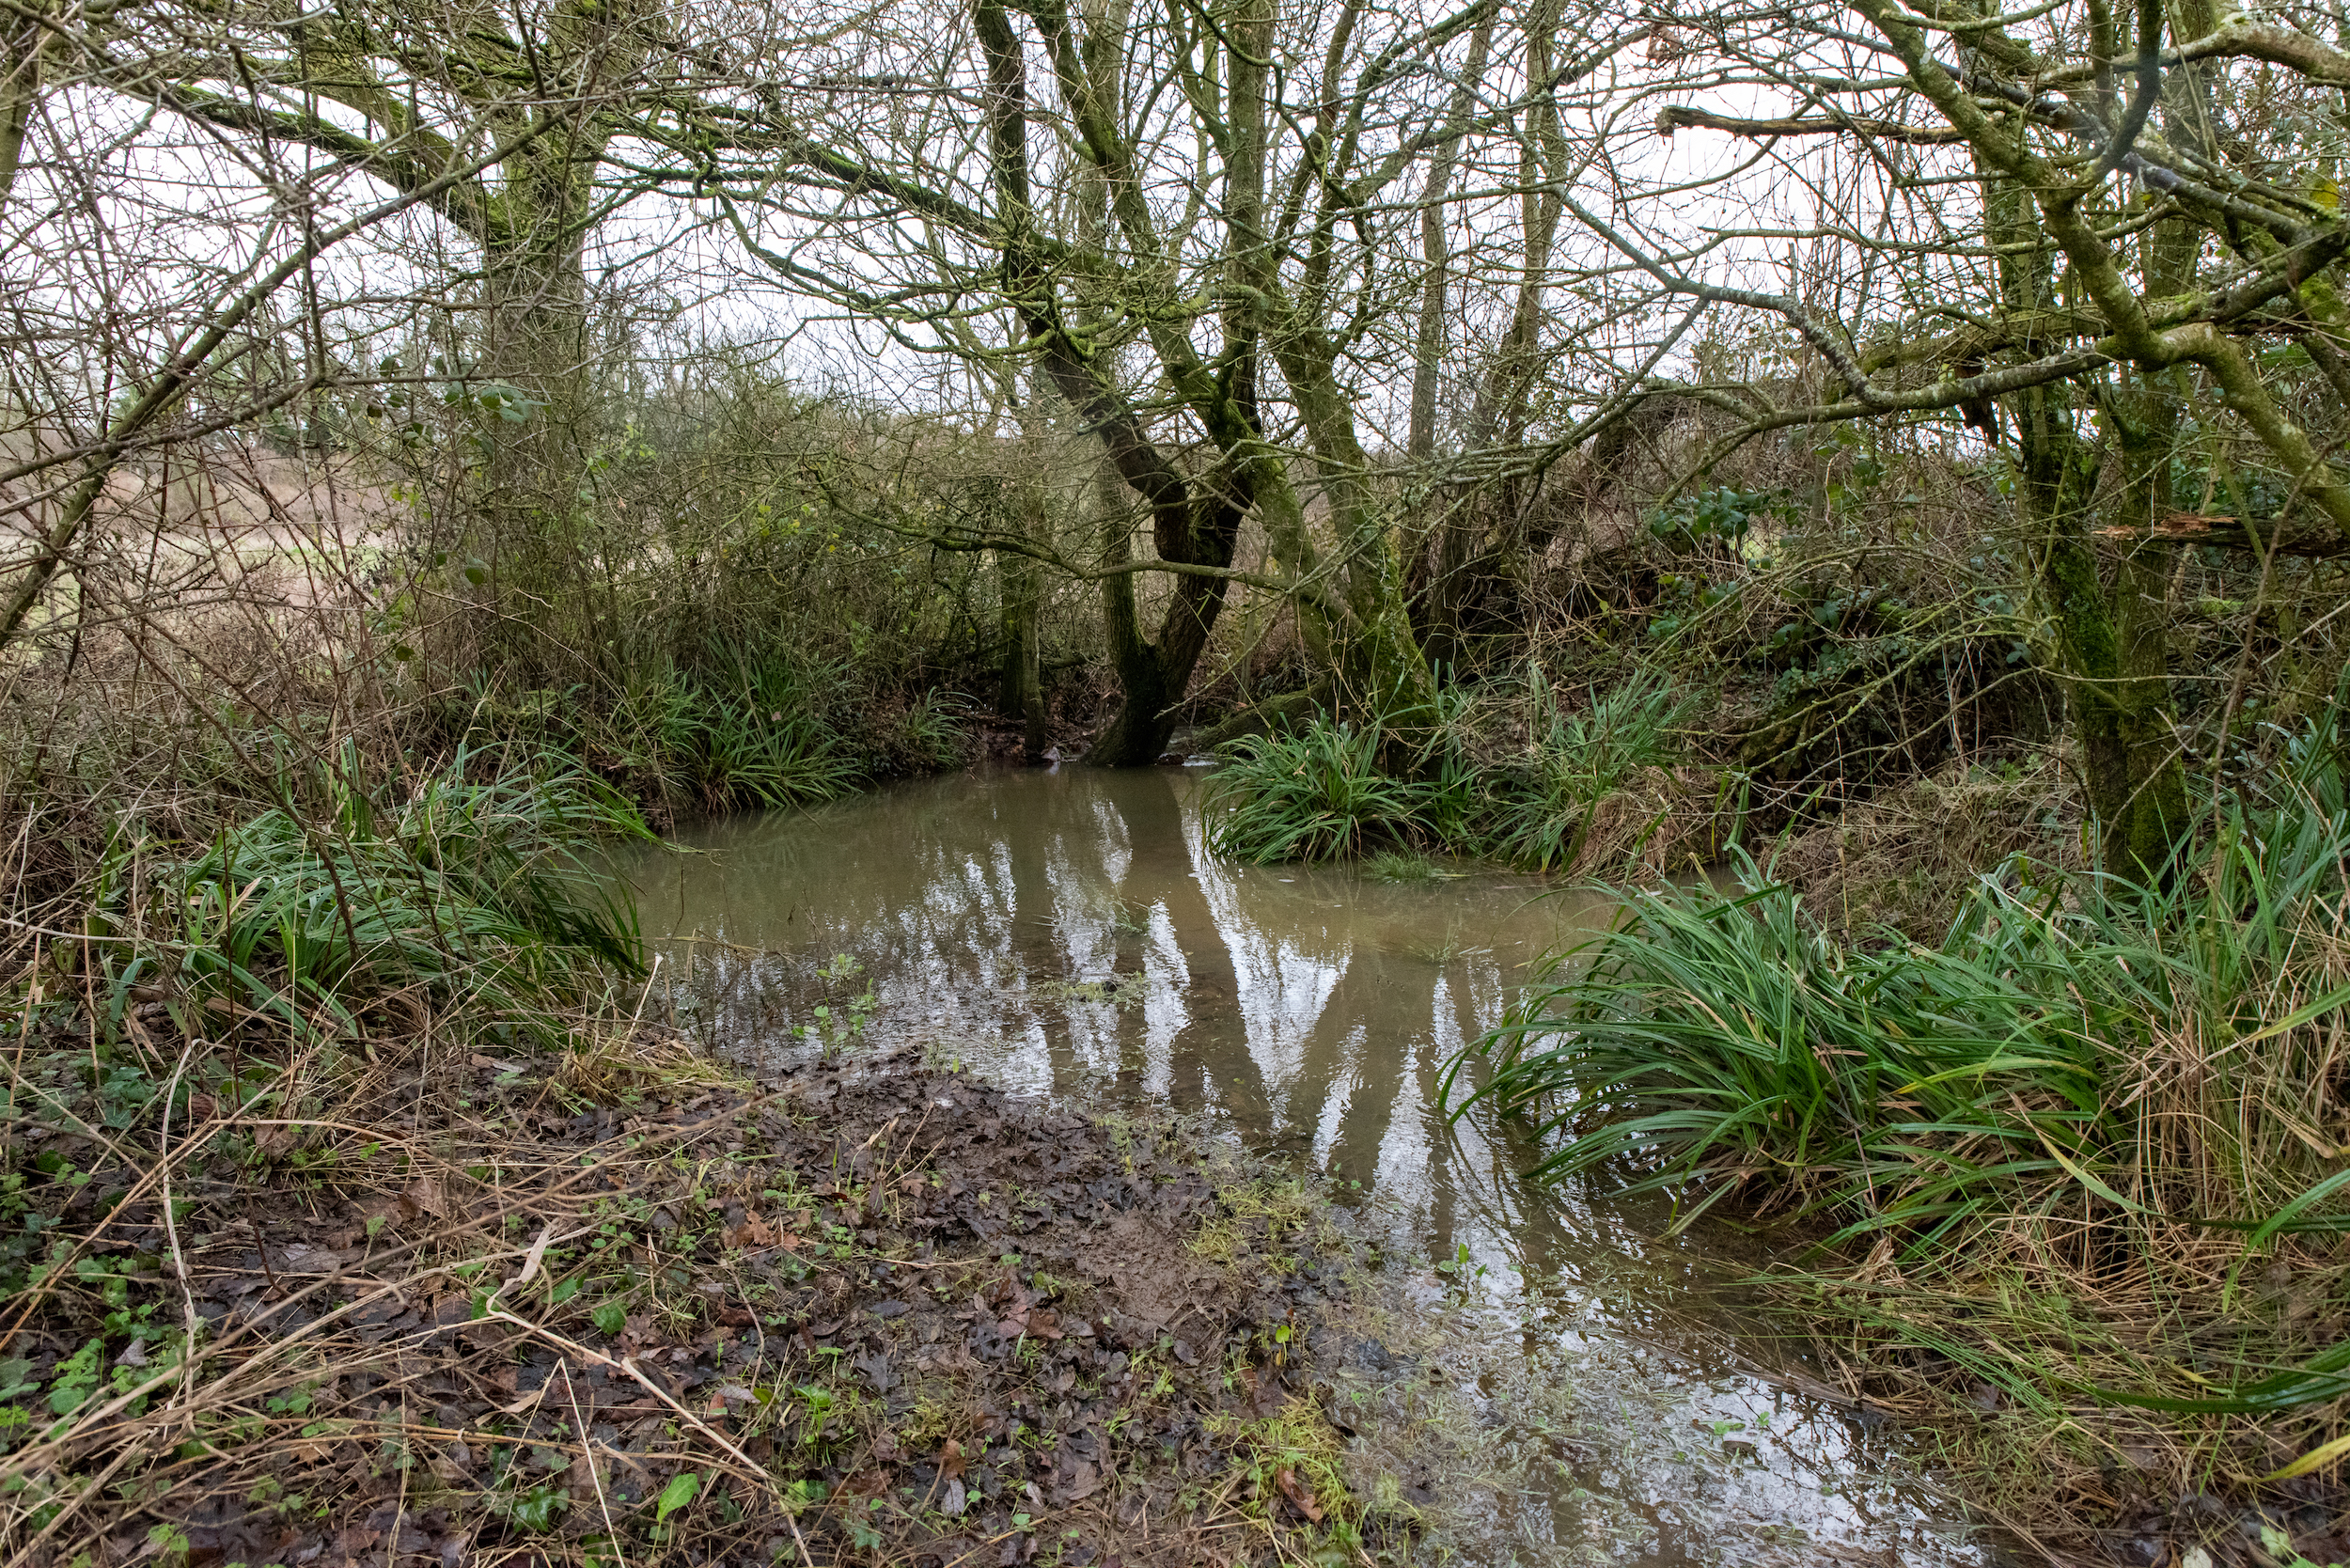 A pond on the nature recovery site in Somerset (Sam Rose)